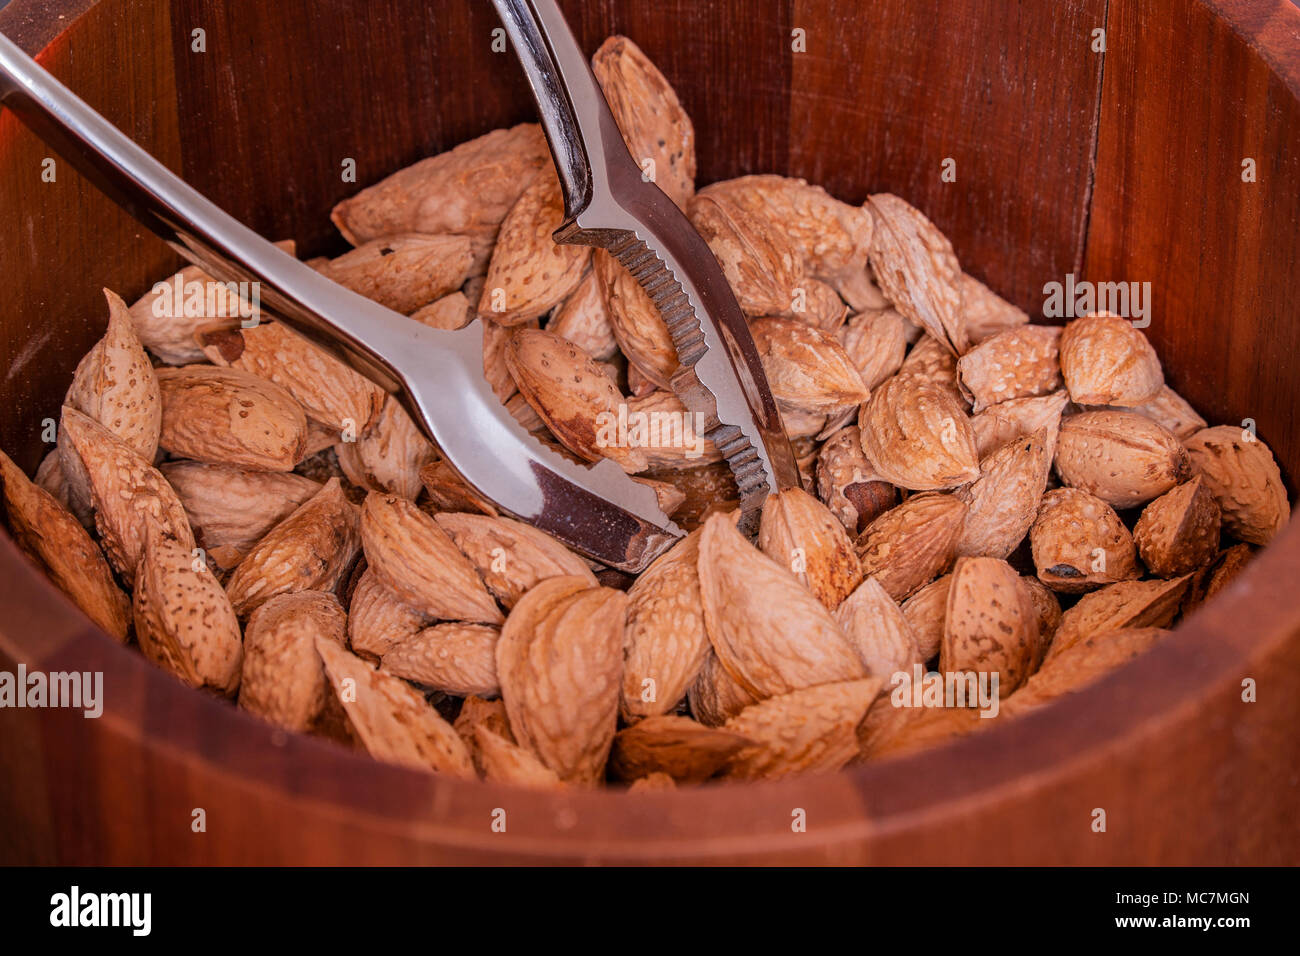 Almonds in a wooden bowl for healthy eating Stock Photo